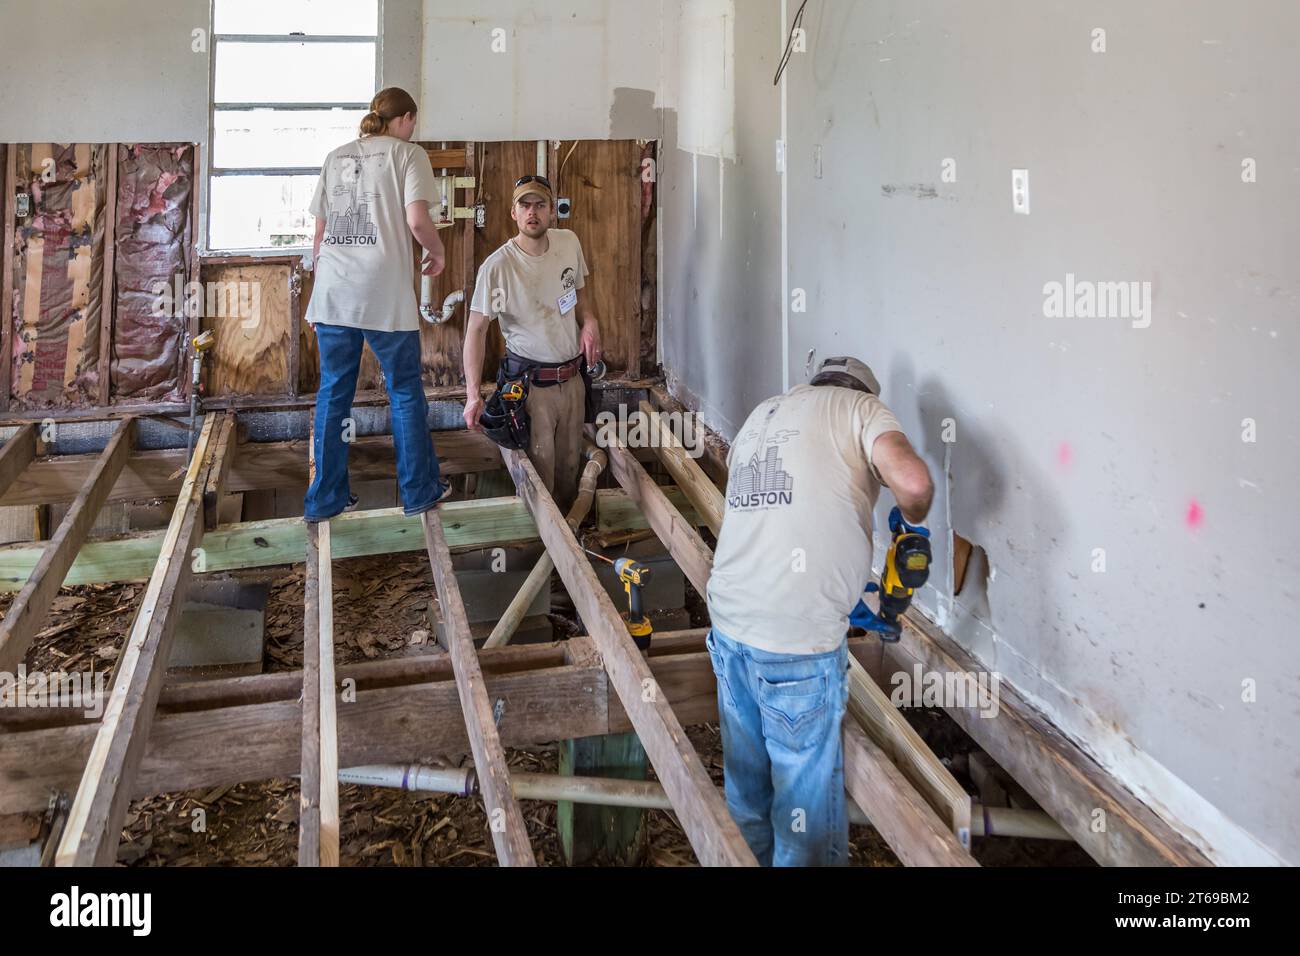 Members of 8 Days of Hope faith based charity volunteer team replacing the floor of a home that was flooded in Houston, Texas Stock Photo